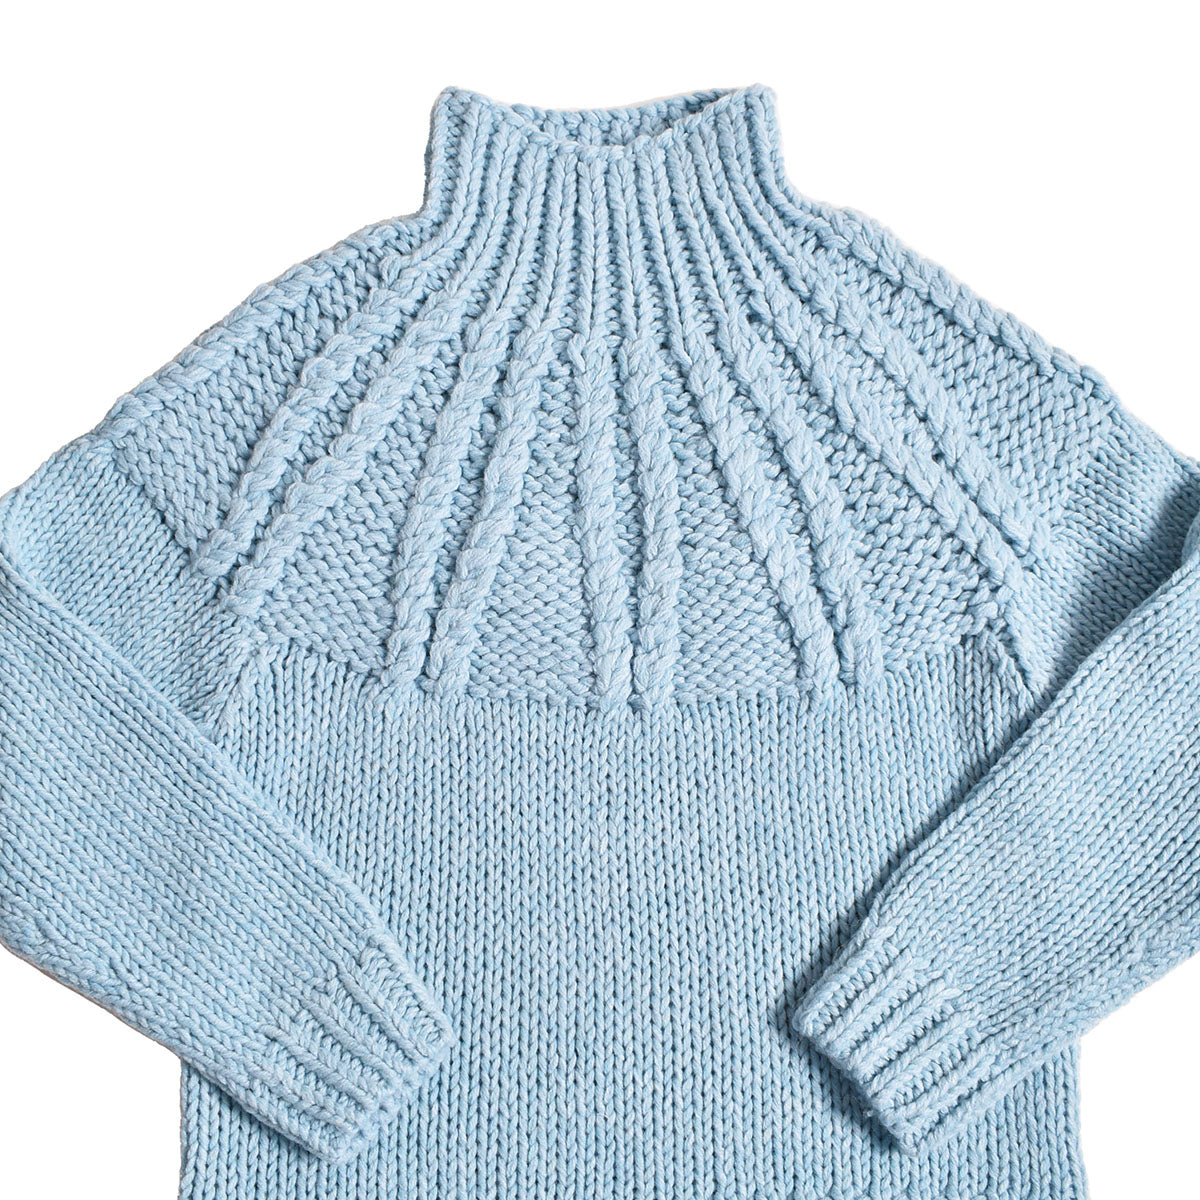 CLANE]CHUNKY CABLE HAND KNIT TOPS/BLUE(15106-2312) – R&Co.